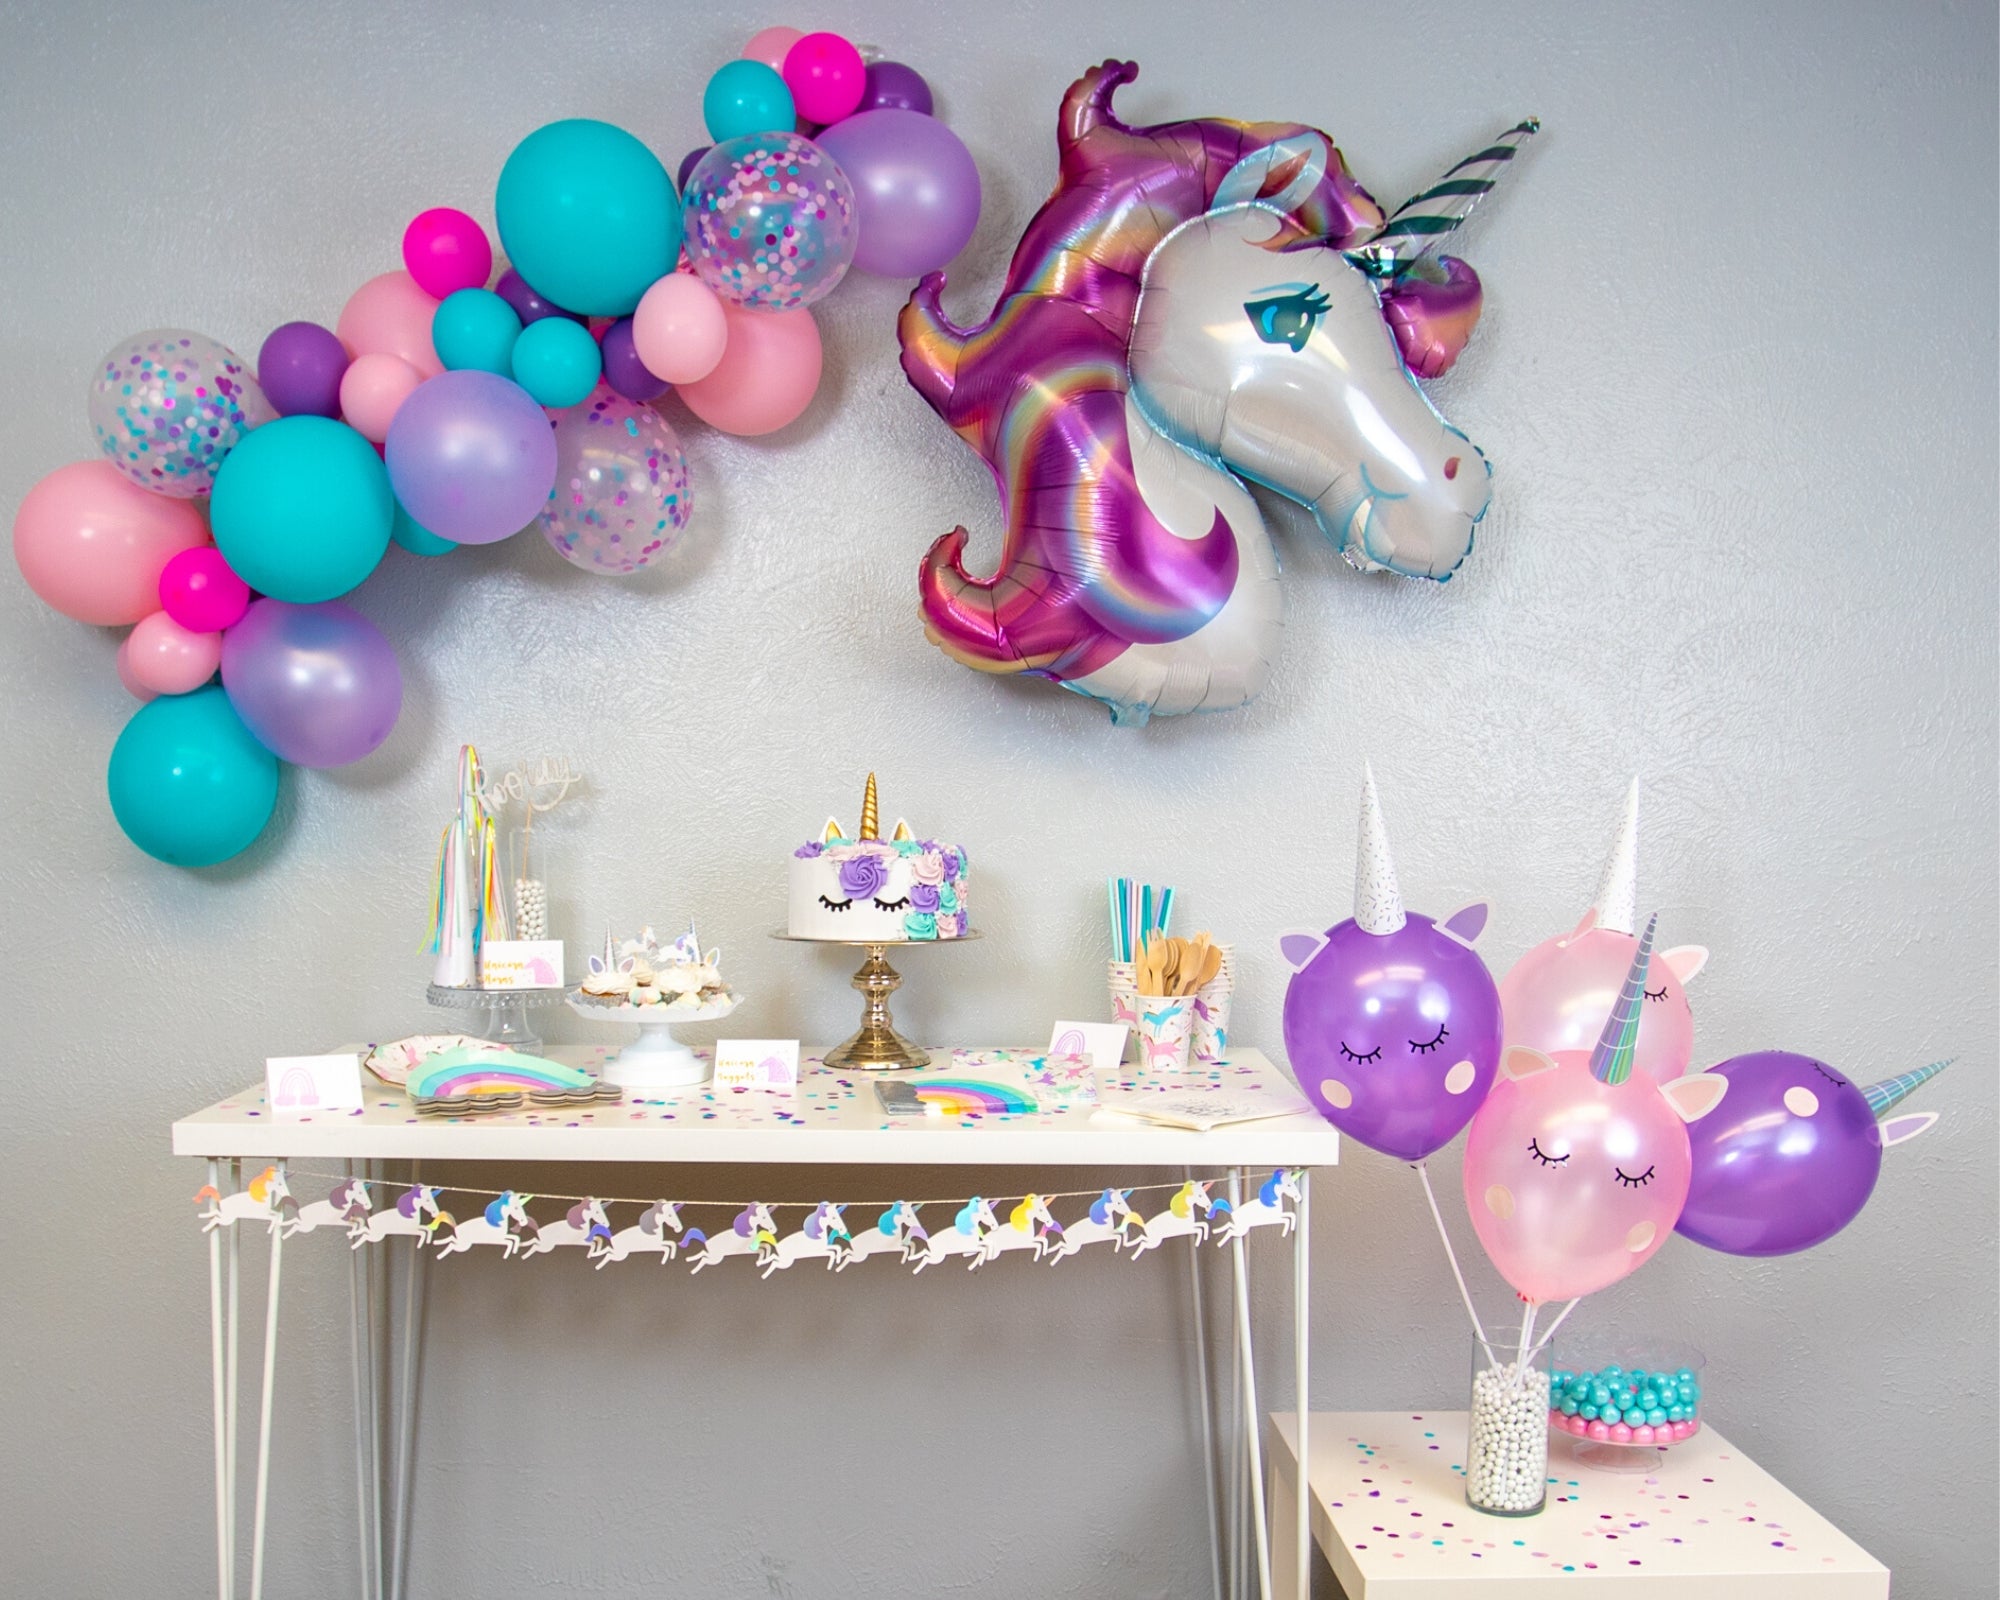 Unicorn Party Cups Unicorns Disposable With Lids Straws Birthday